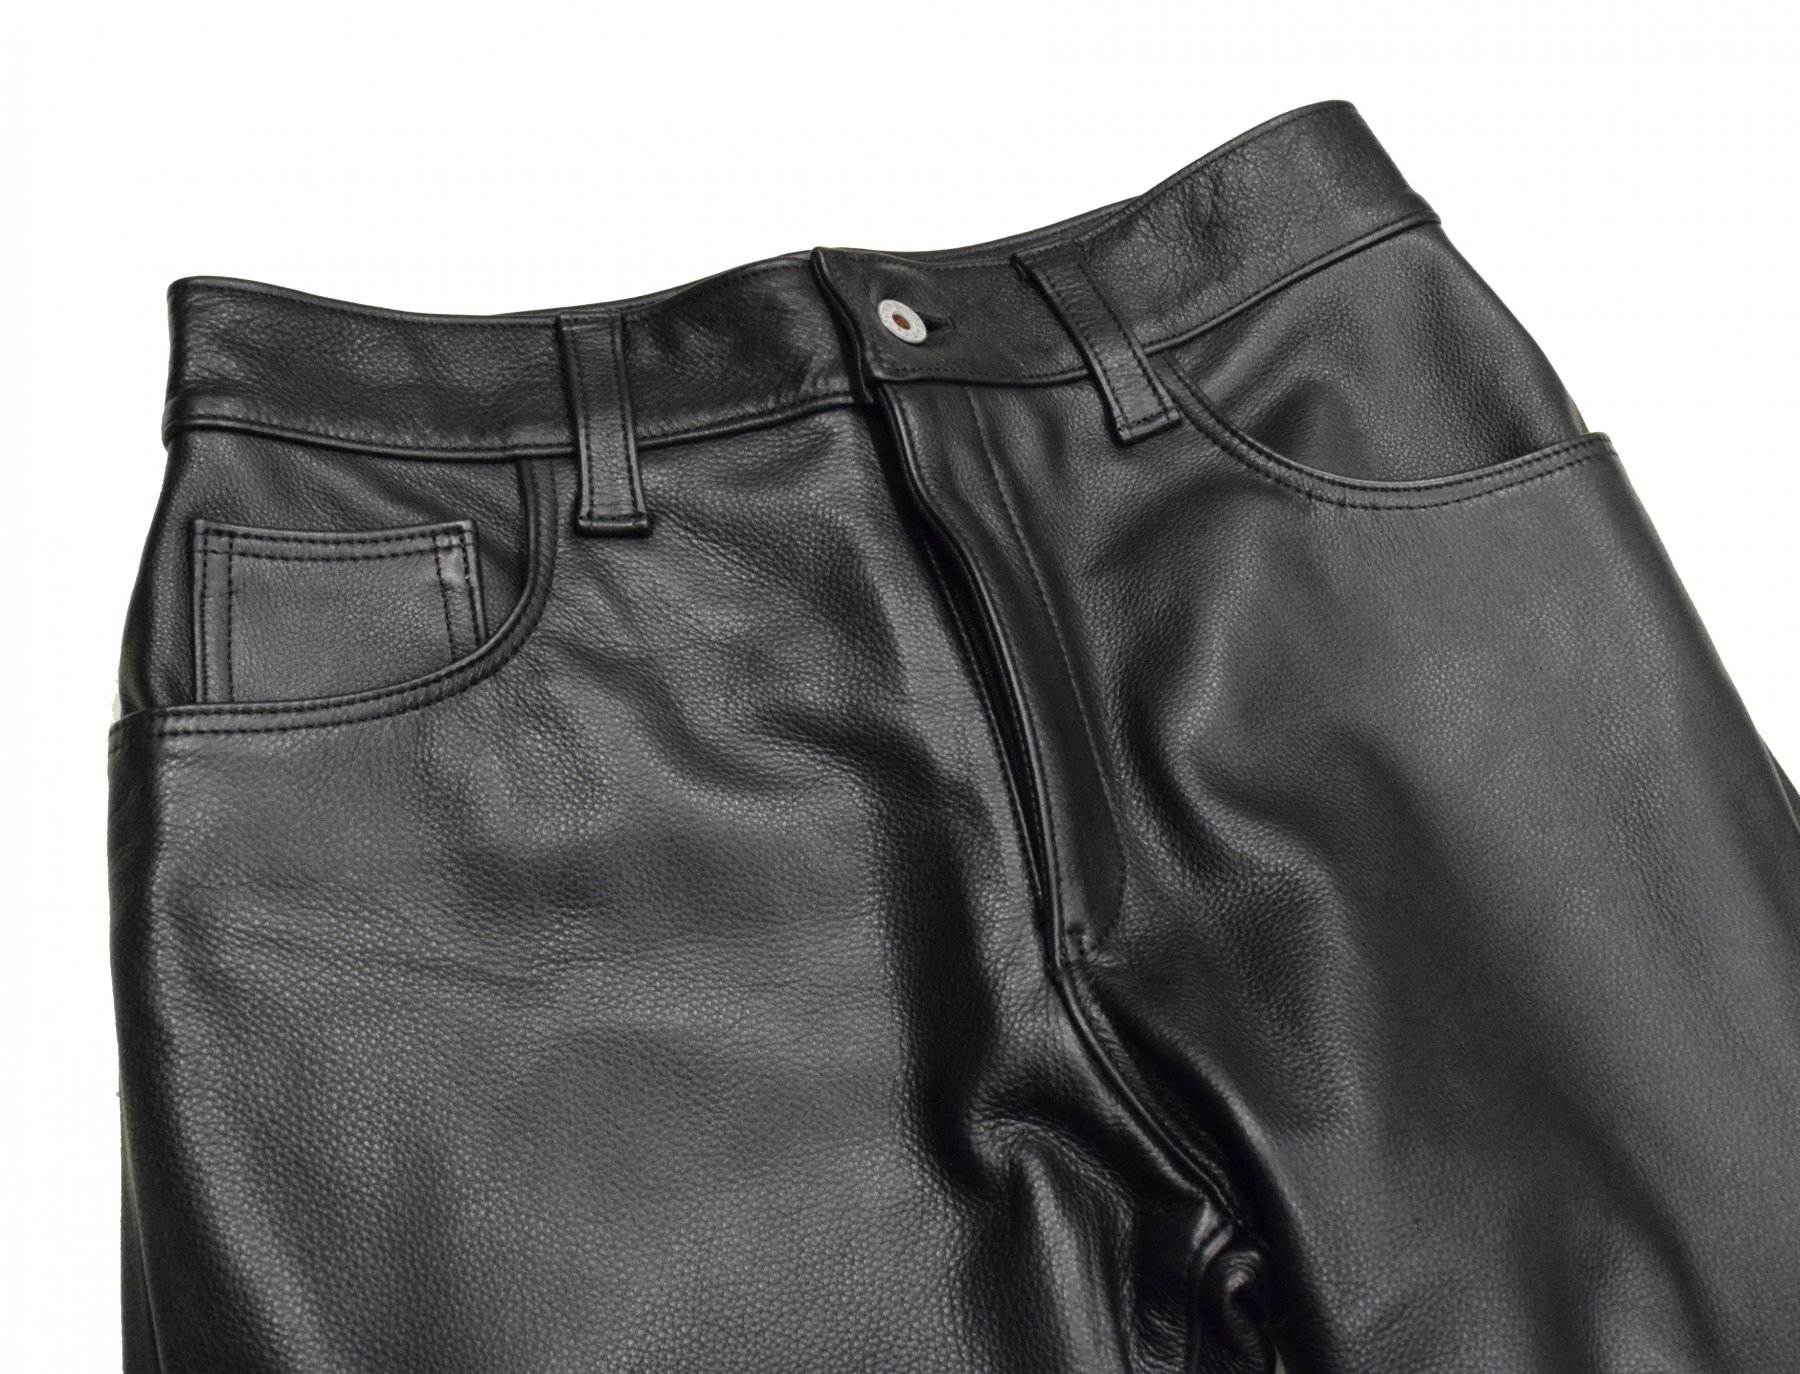 Y'2 LEATHER/ワイツーレザー】レザーパンツ/SPｰ02：STEER OIL PANTS